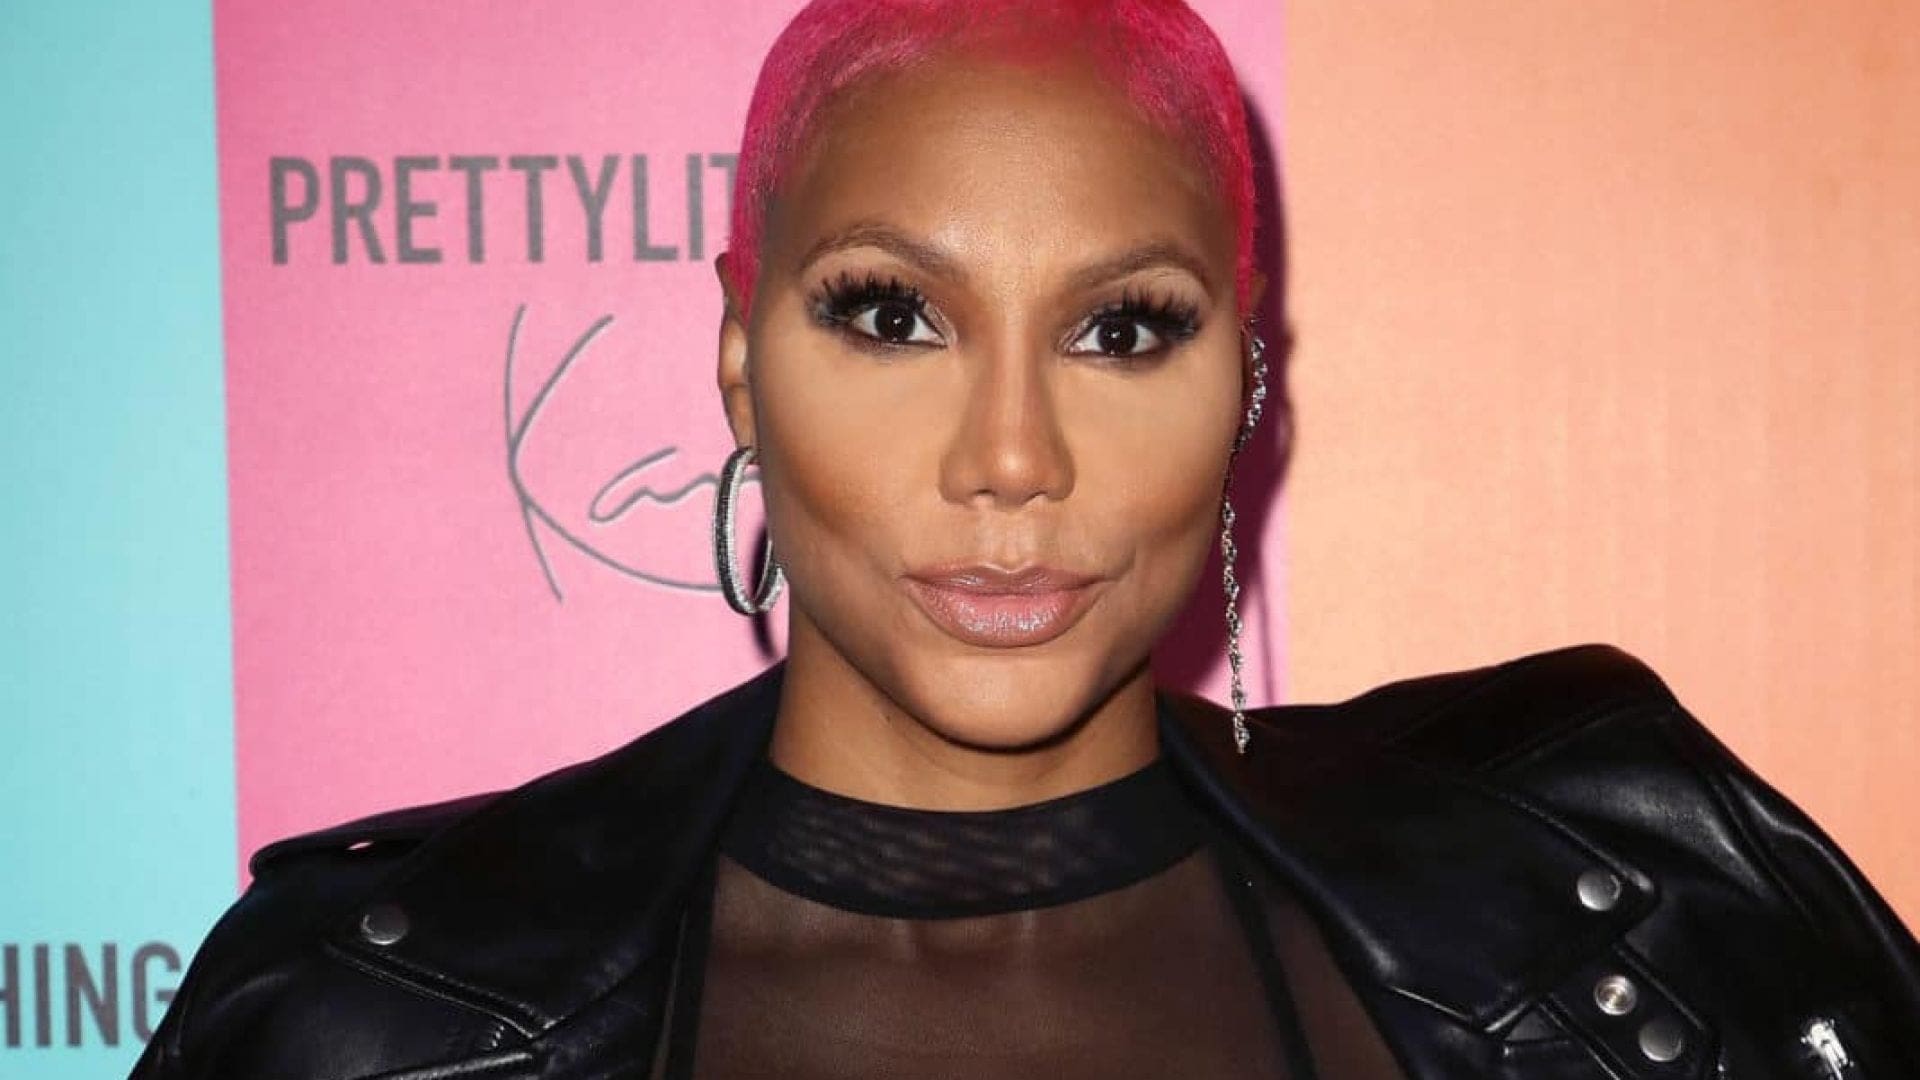 Tamar Braxton Shares A Video Featuring Her Mom, Evelyn Braxton Cooking